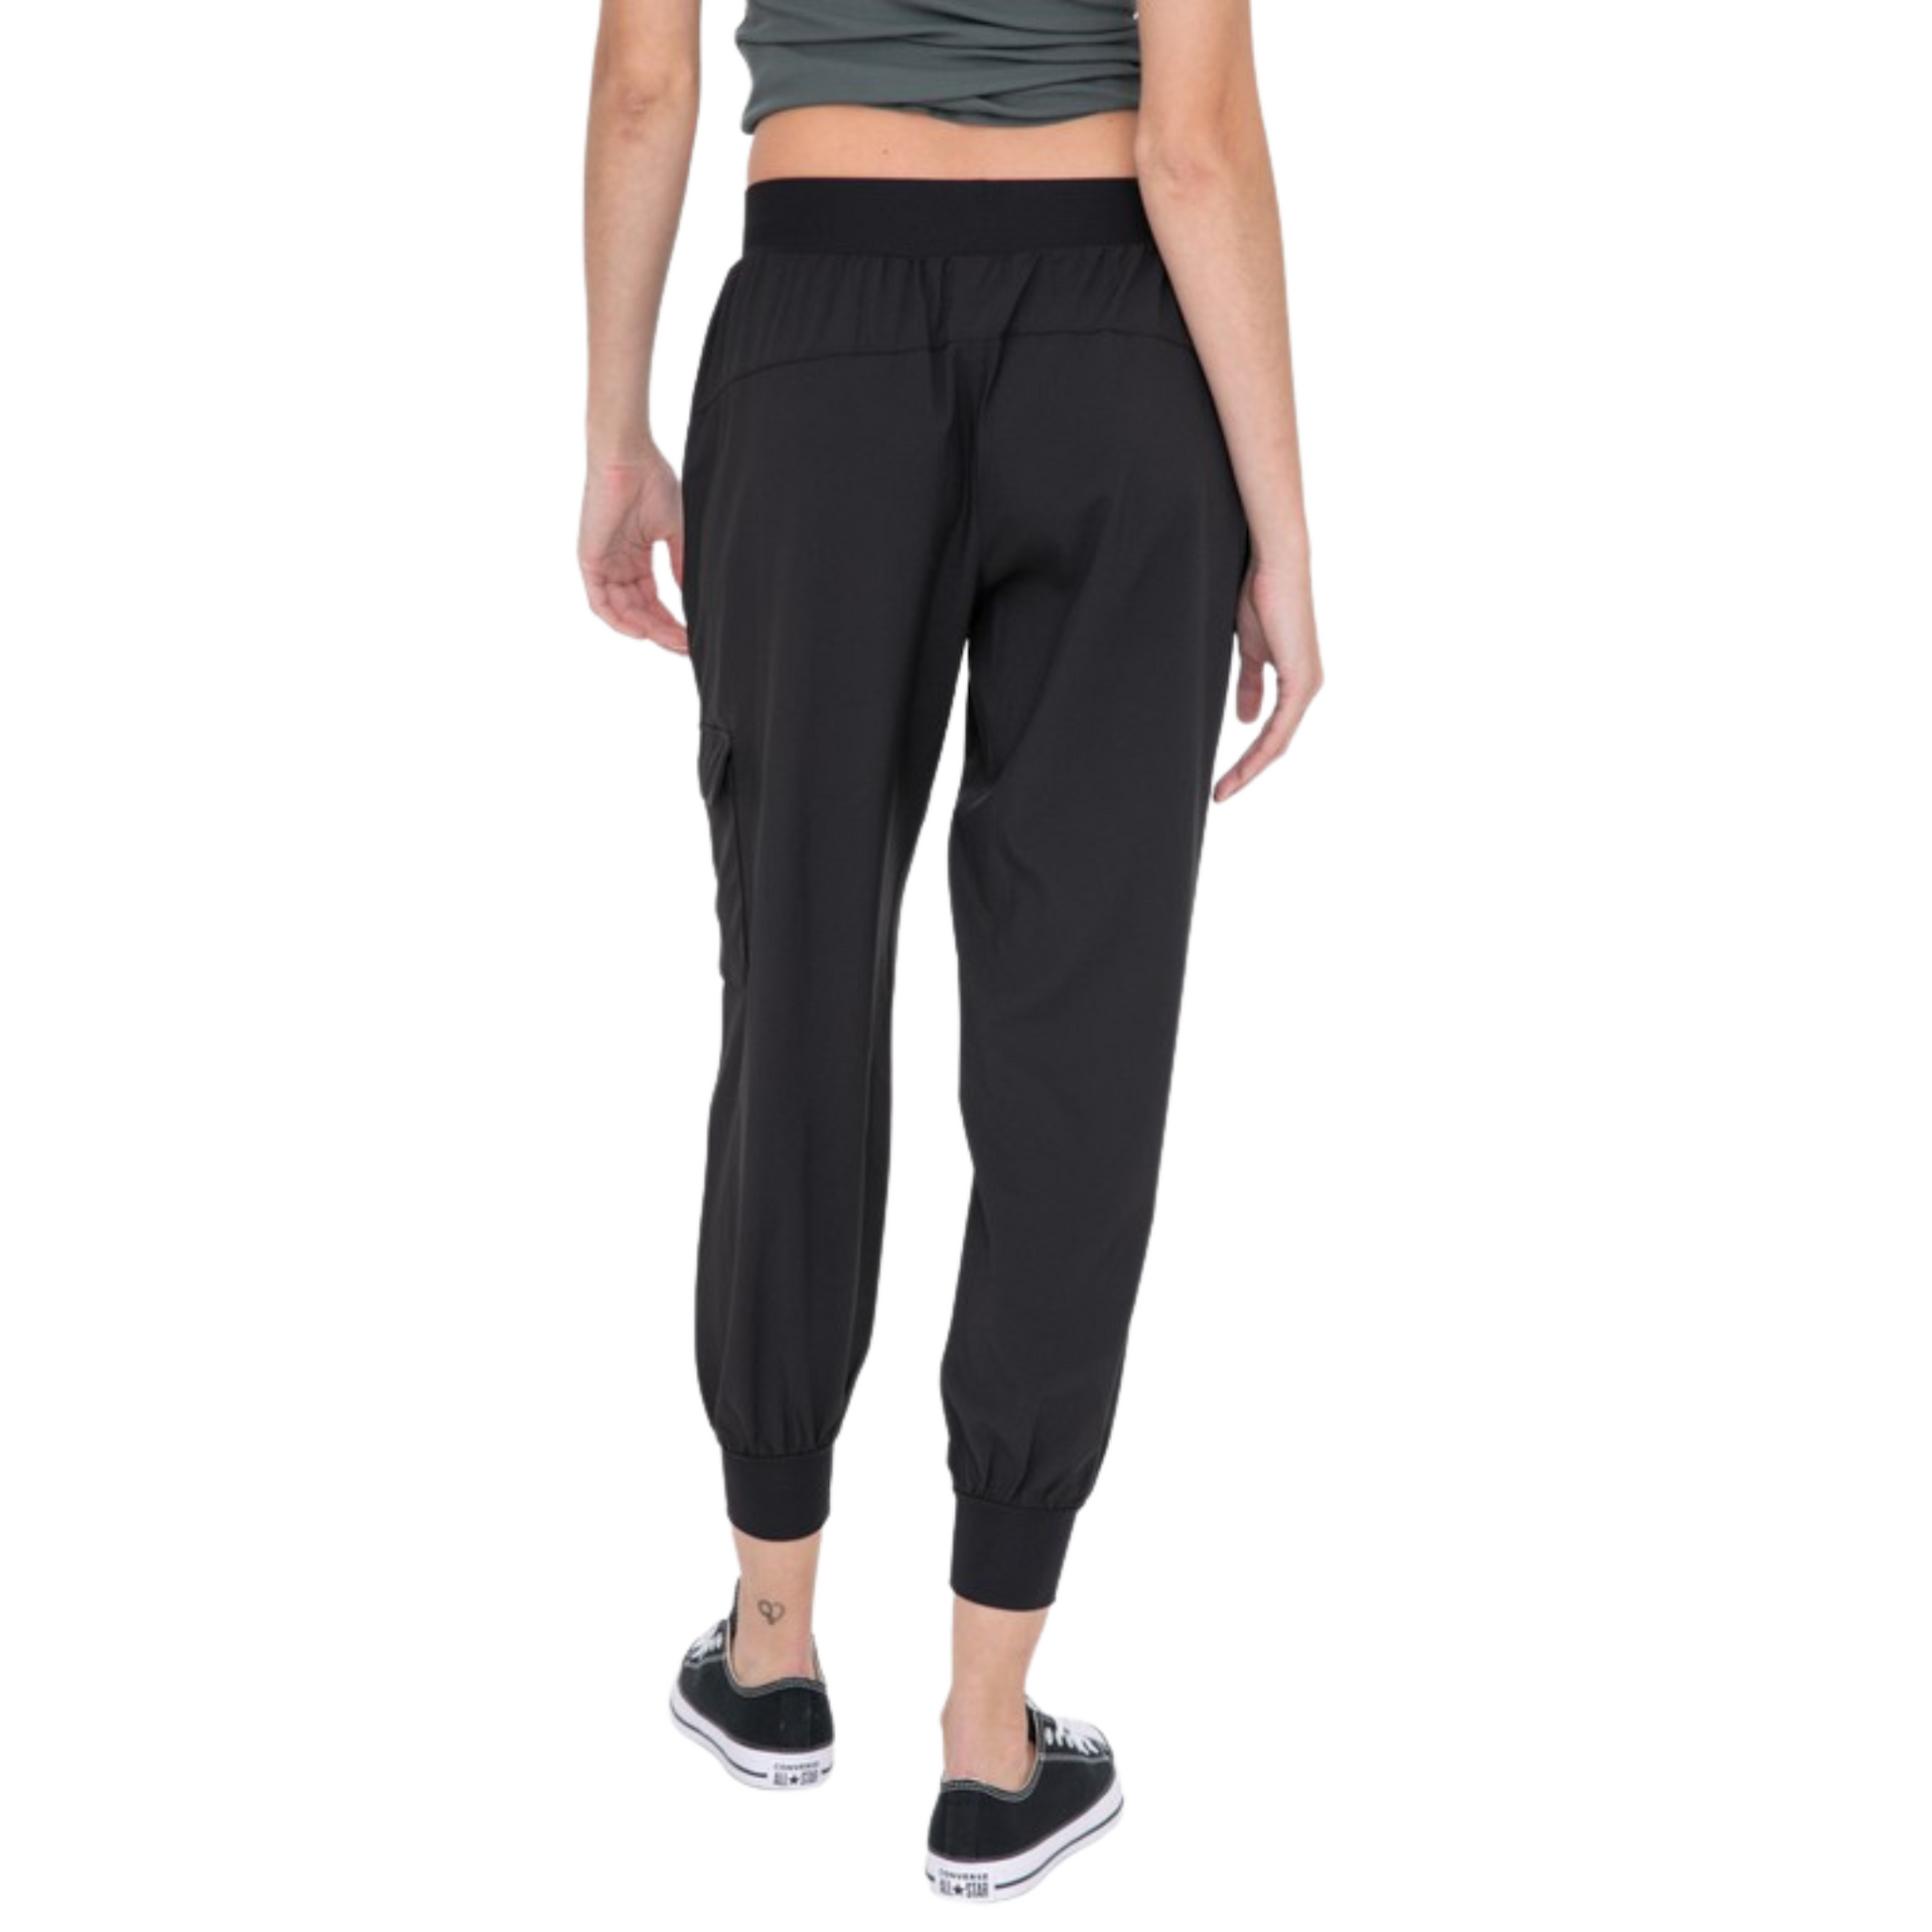 These High Waisted Capri Active Joggers offer a perfect blend of style and functionality. With convenient front pockets for quick access and a secure zipper pocket for keeping important items safe, you can stay focused on your exercise routine. The cargo-style pocket adds utility, while the ribbed back and drawstring offer an adjustable fit. The swoop back seam provides a flattering cut.